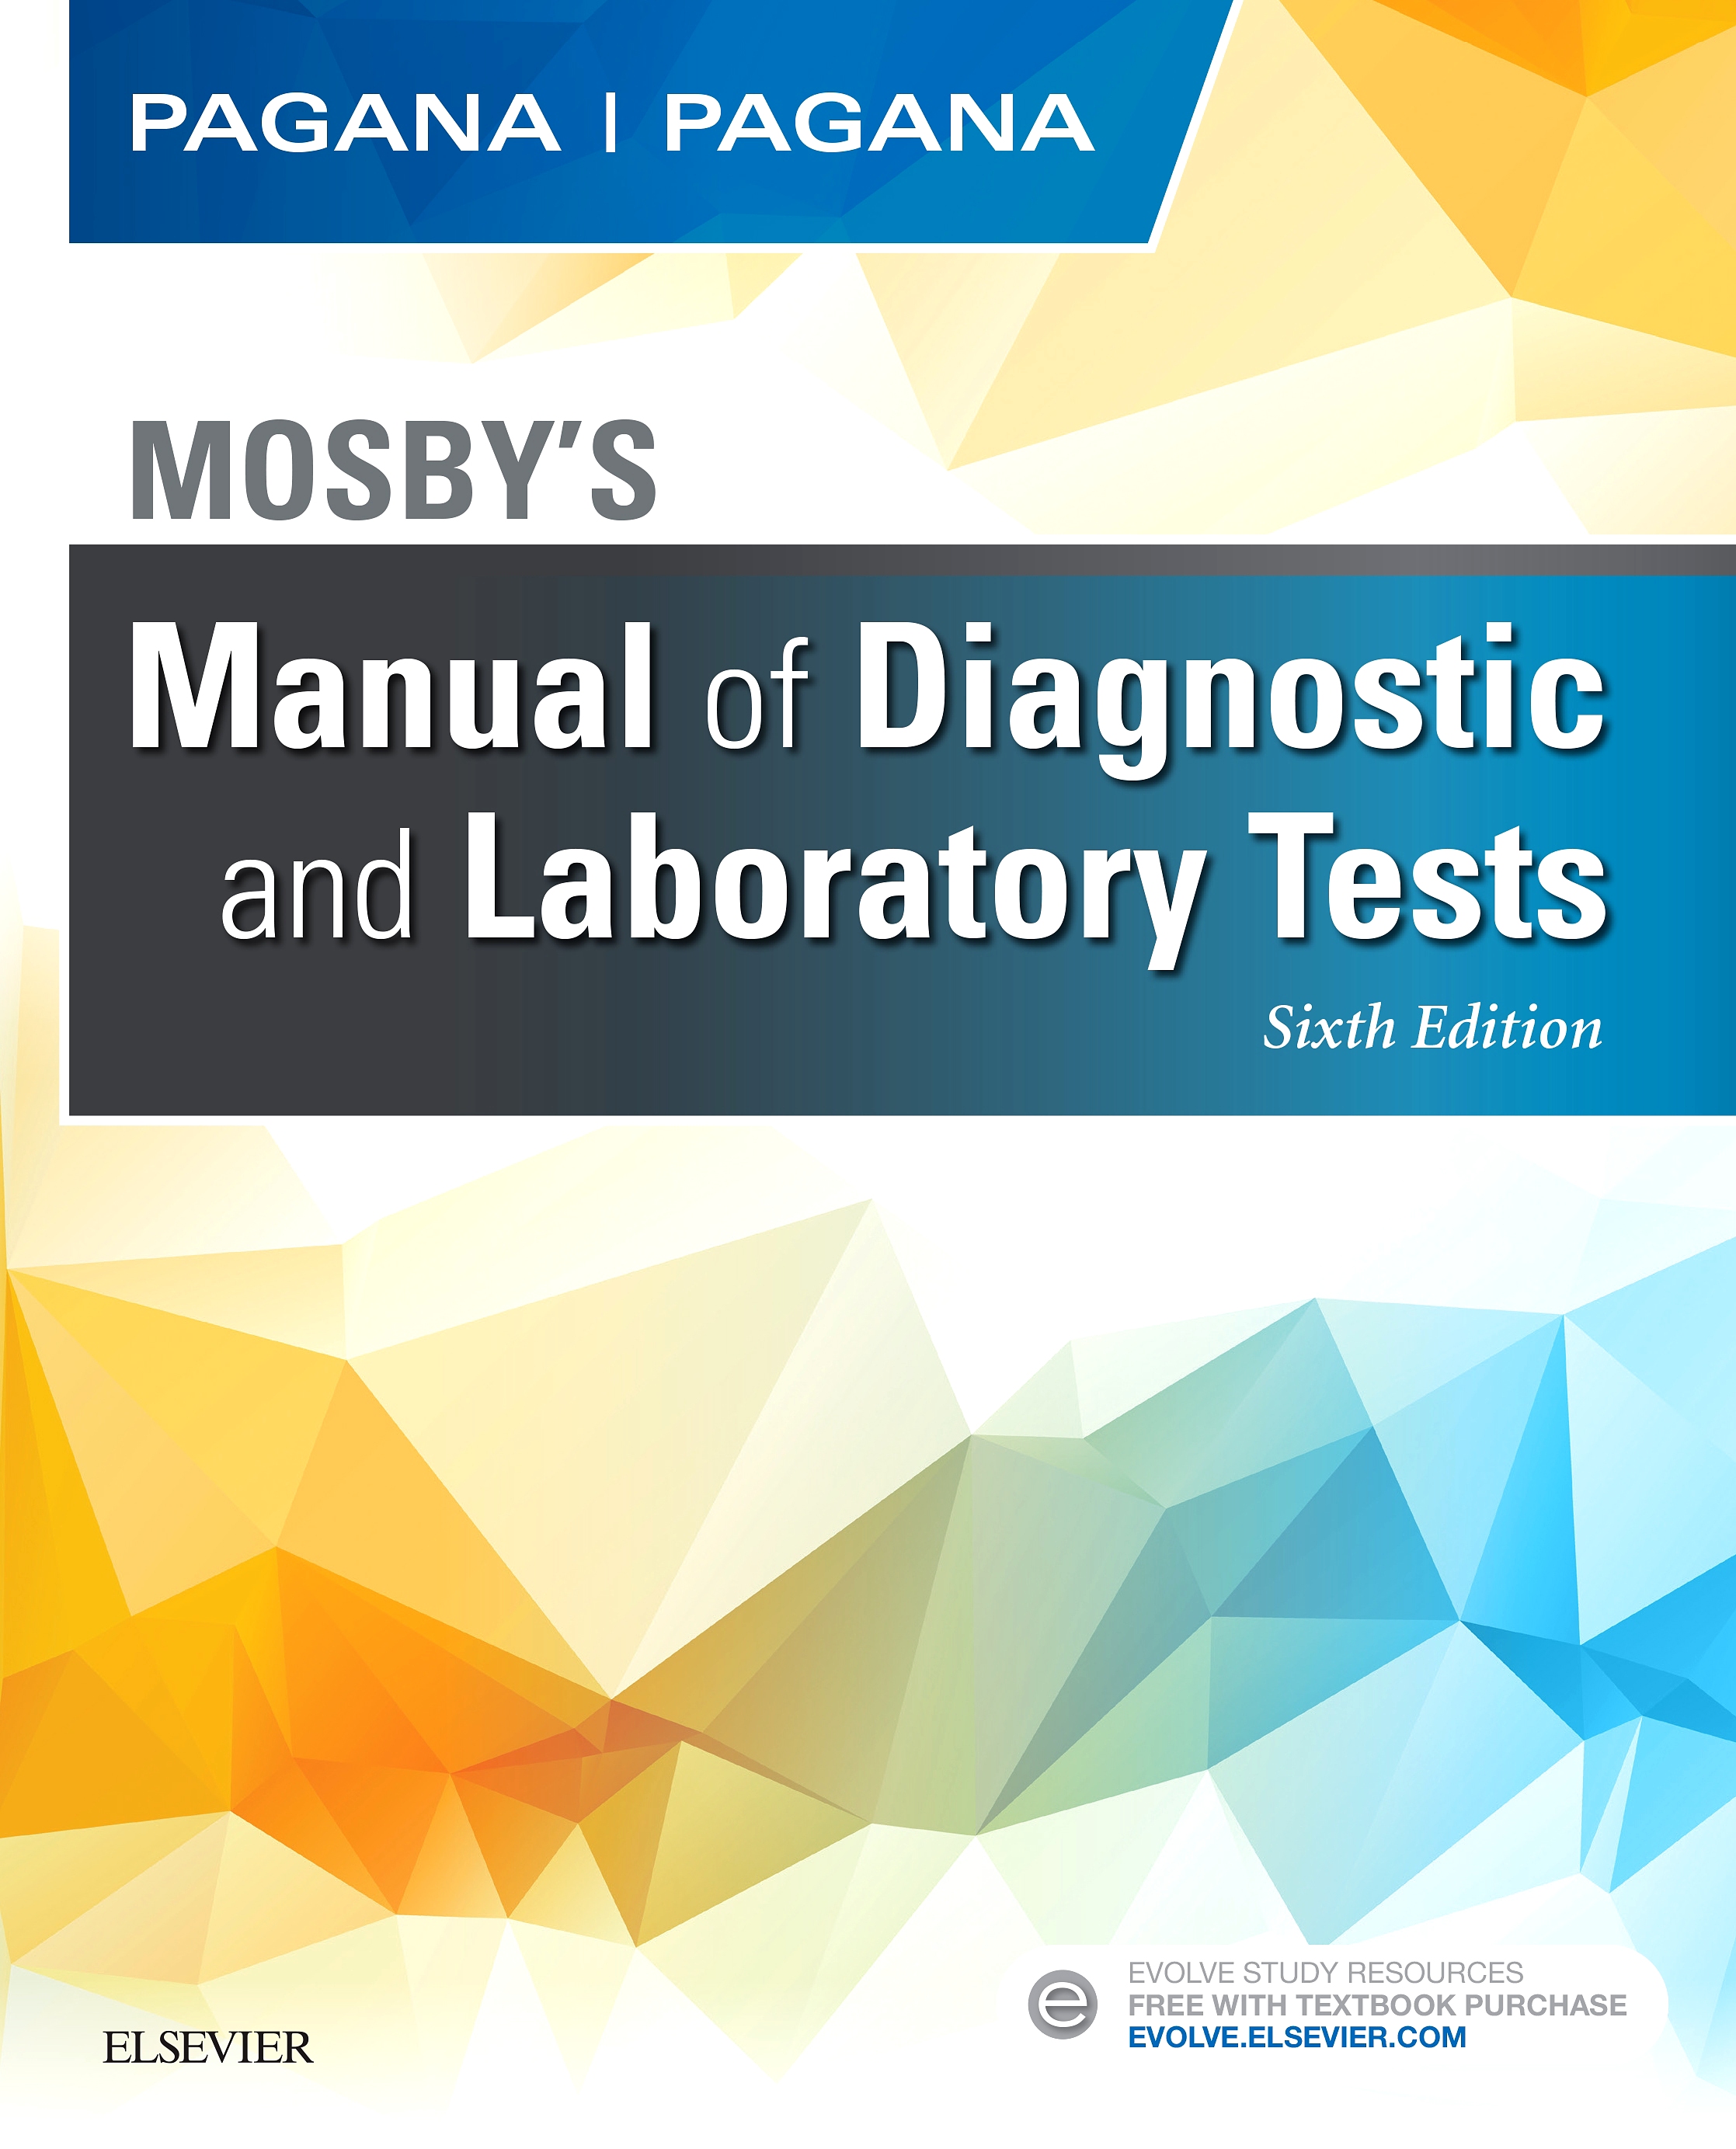 Evolve Resources for Mosby's Manual of Diagnostic and Laboratory Tests, 6th Edition